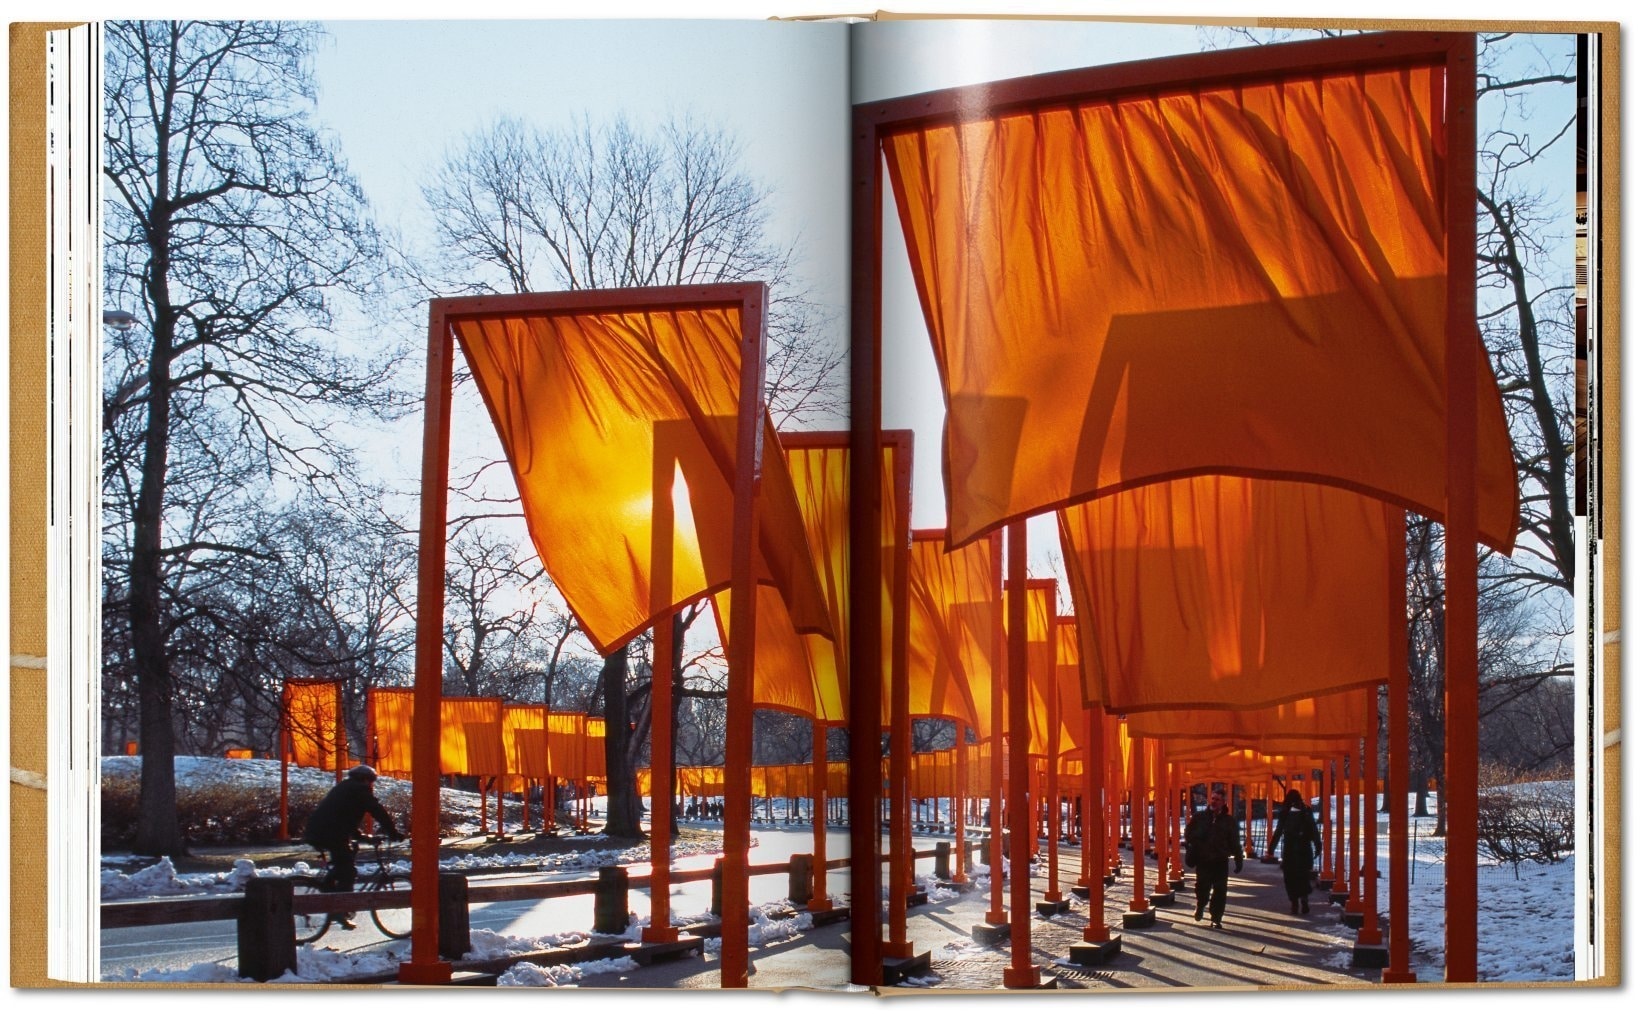 christo-and-jeanne-claude-updated-edition-4